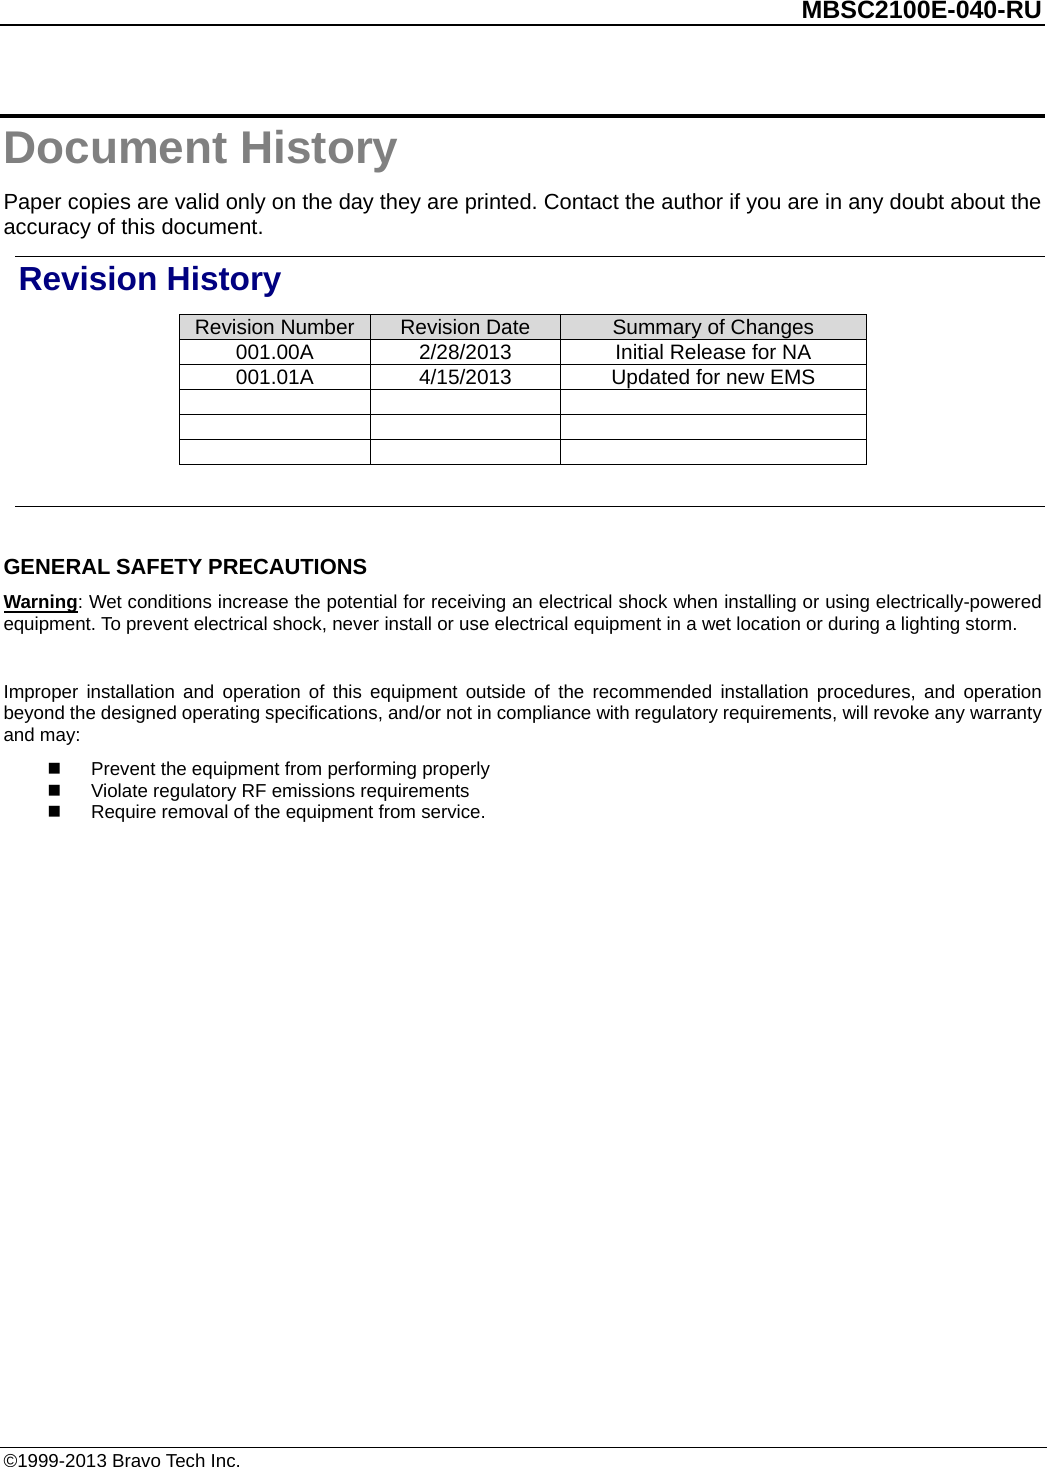          MBSC2100E-040-RU   ©1999-2013 Bravo Tech Inc. Document History Paper copies are valid only on the day they are printed. Contact the author if you are in any doubt about the accuracy of this document. Revision History Revision Number Revision Date Summary of Changes 001.00A 2/28/2013 Initial Release for NA   001.01A 4/15/2013 Updated for new EMS              GENERAL SAFETY PRECAUTIONS Warning: Wet conditions increase the potential for receiving an electrical shock when installing or using electrically-powered equipment. To prevent electrical shock, never install or use electrical equipment in a wet location or during a lighting storm.  Improper installation and operation of this equipment outside of the recommended installation procedures, and operation beyond the designed operating specifications, and/or not in compliance with regulatory requirements, will revoke any warranty and may:  Prevent the equipment from performing properly  Violate regulatory RF emissions requirements  Require removal of the equipment from service.  